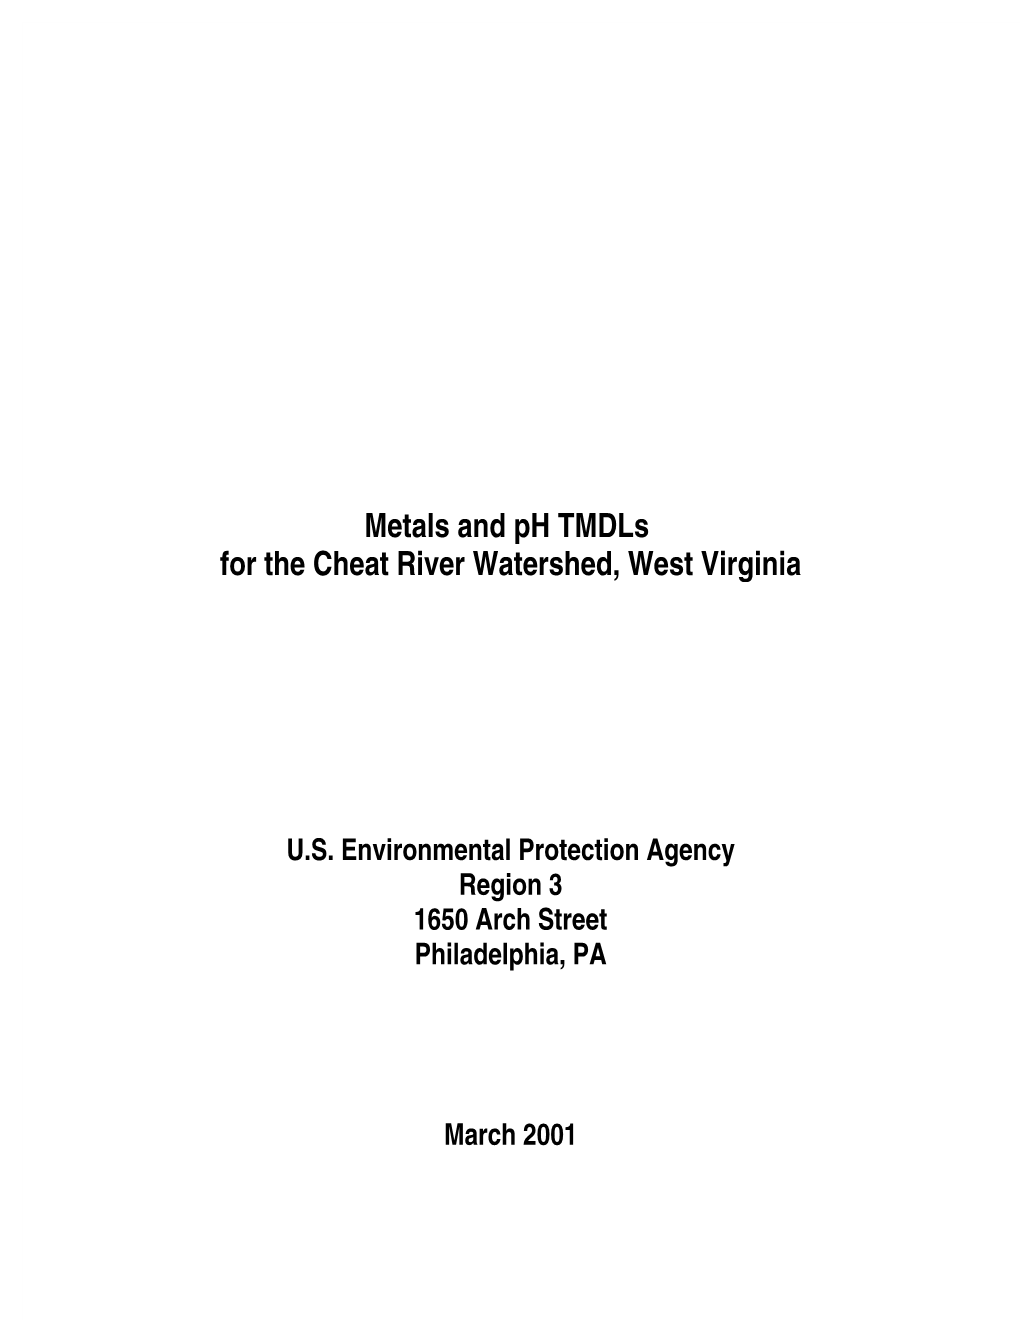 Metals and Ph Tmdls for the Cheat River Watershed, West Virginia